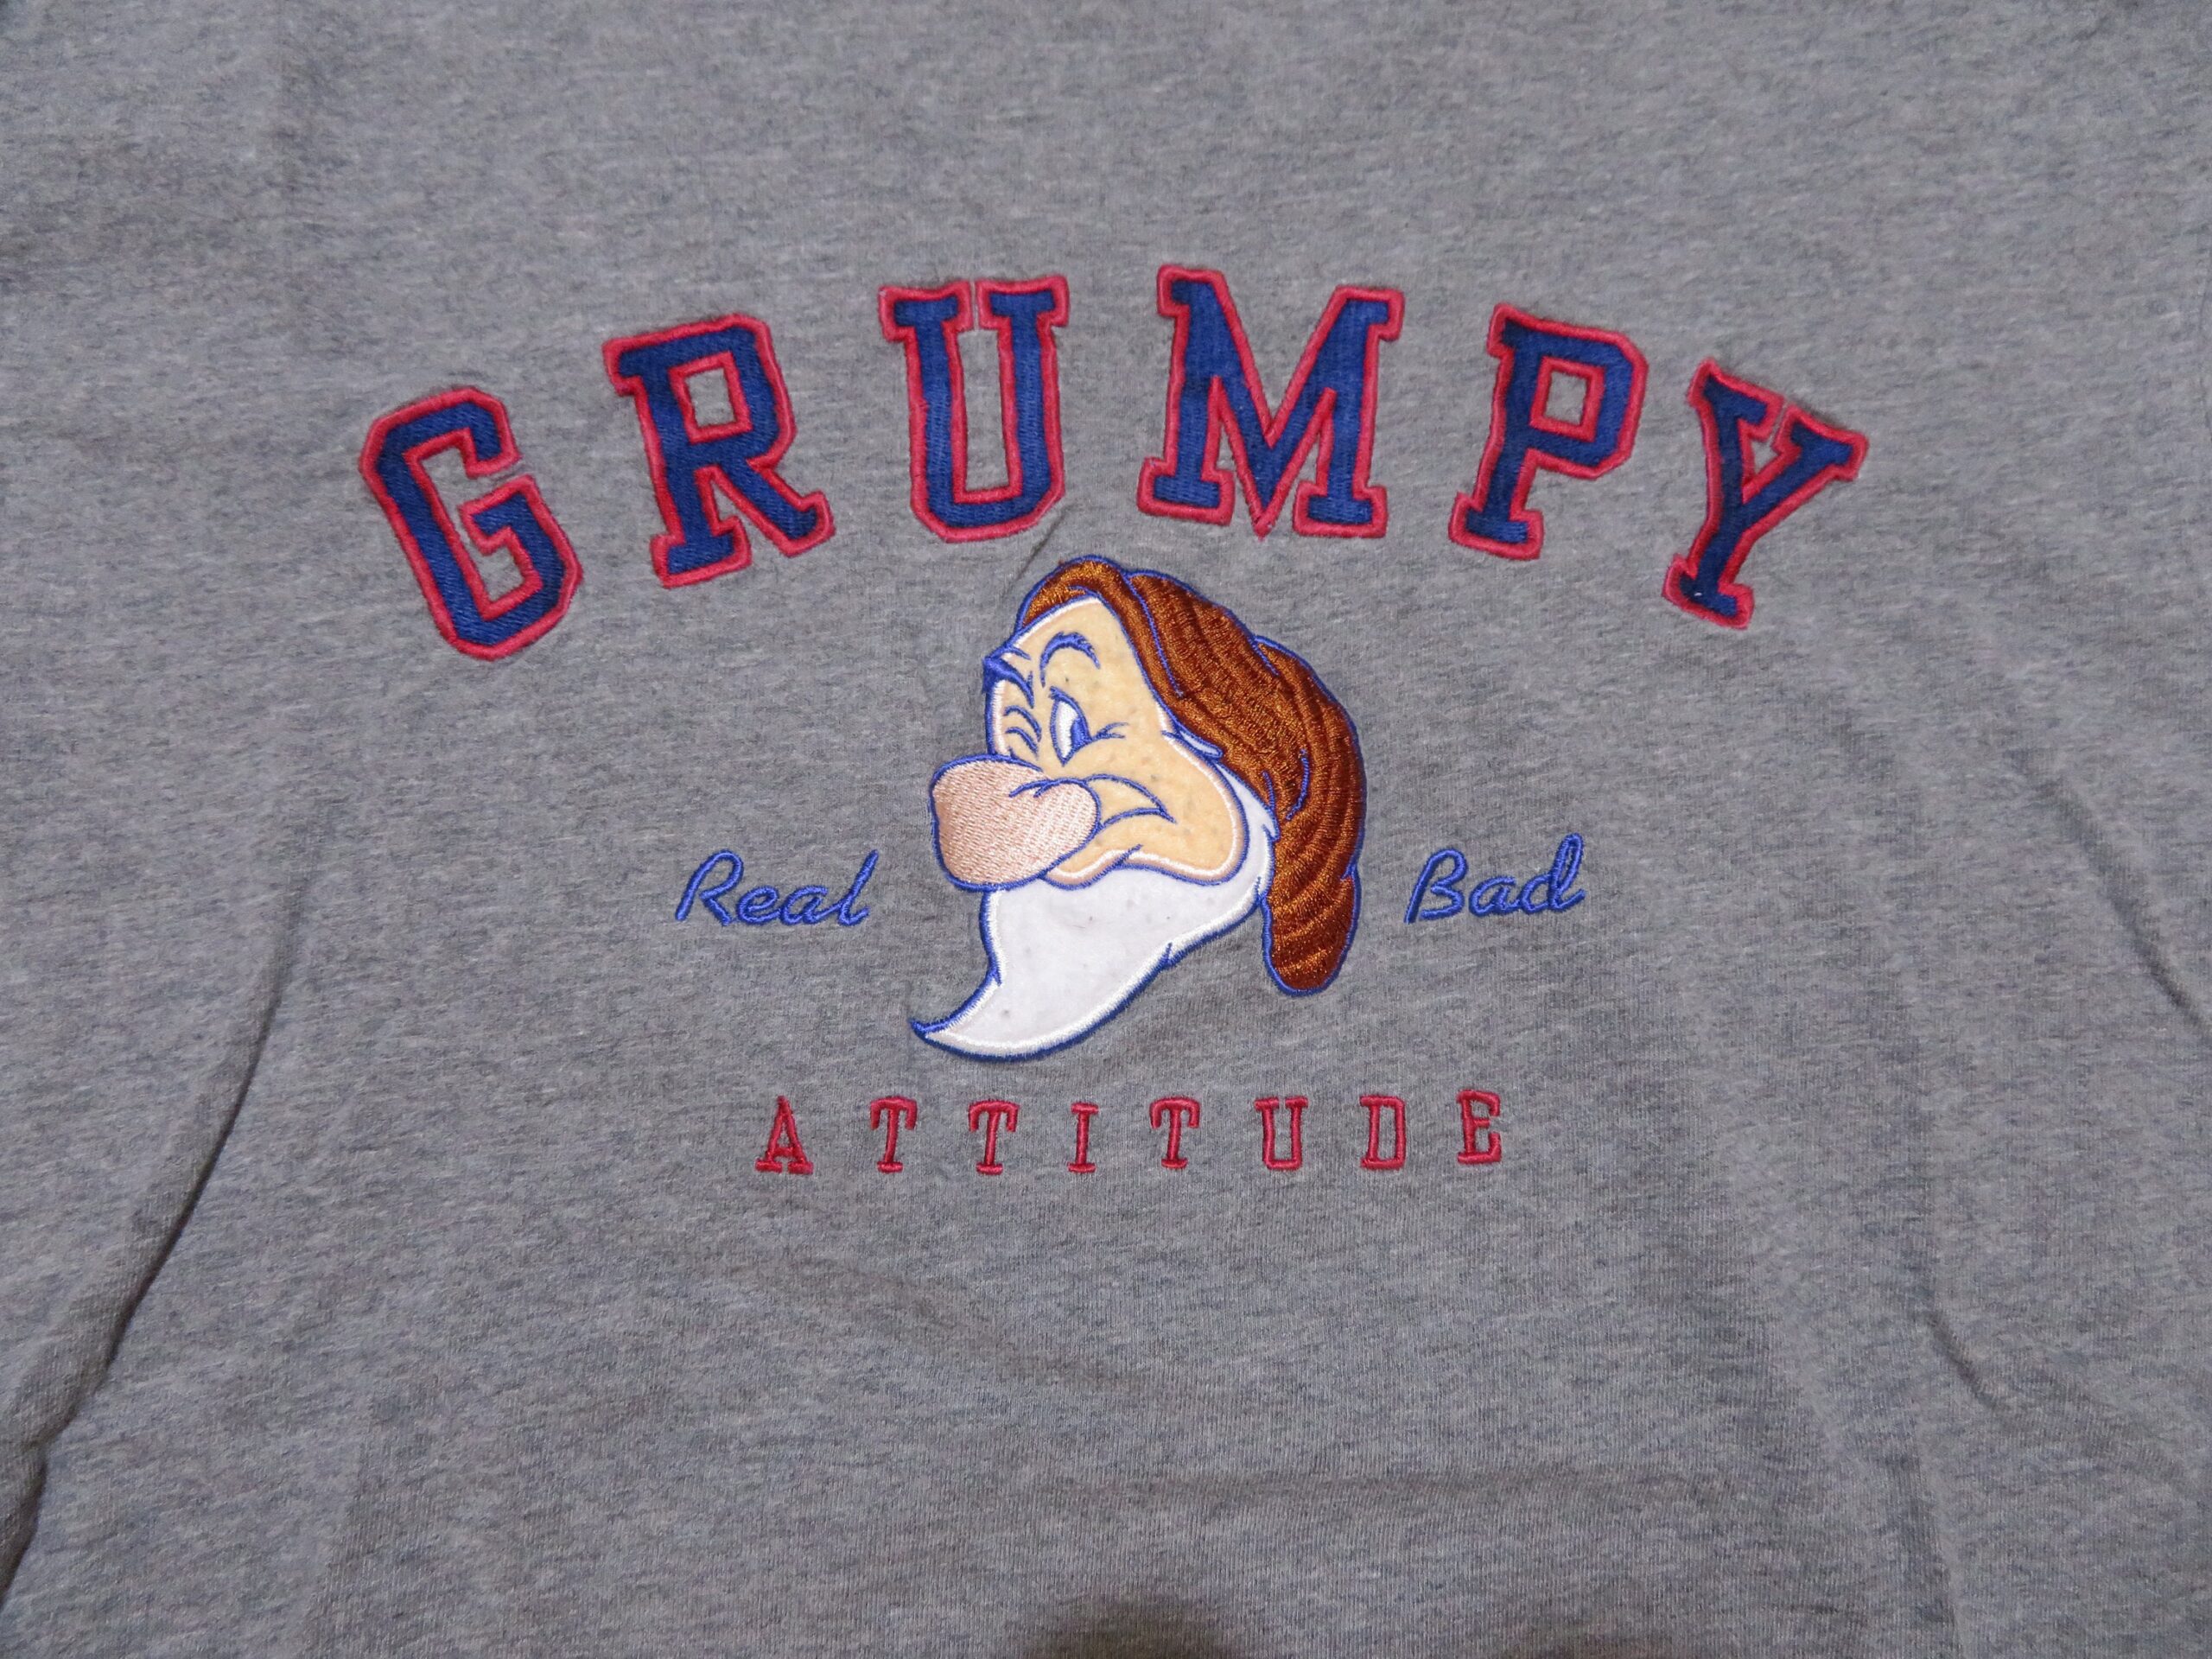 Vintage GRUMPY The Dwarf T-Shirt Real Bad Attitude Gray White Red Blue Brown